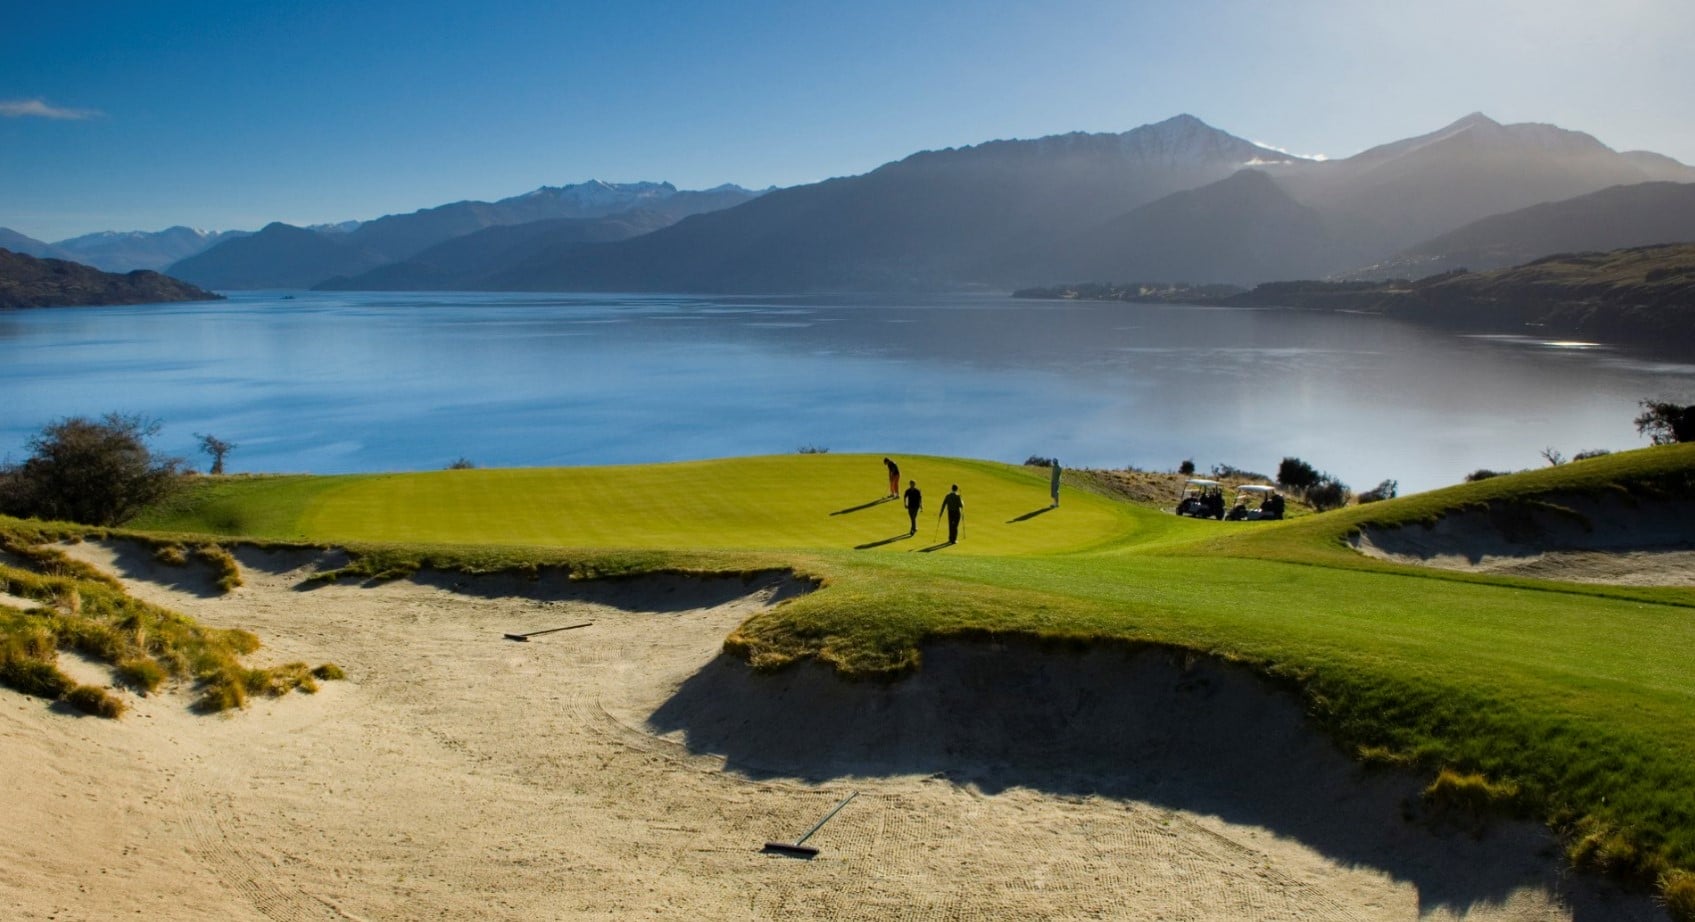 Image of golfers on a putting green at Jack's Point Golf Course in New Zealand's South Island